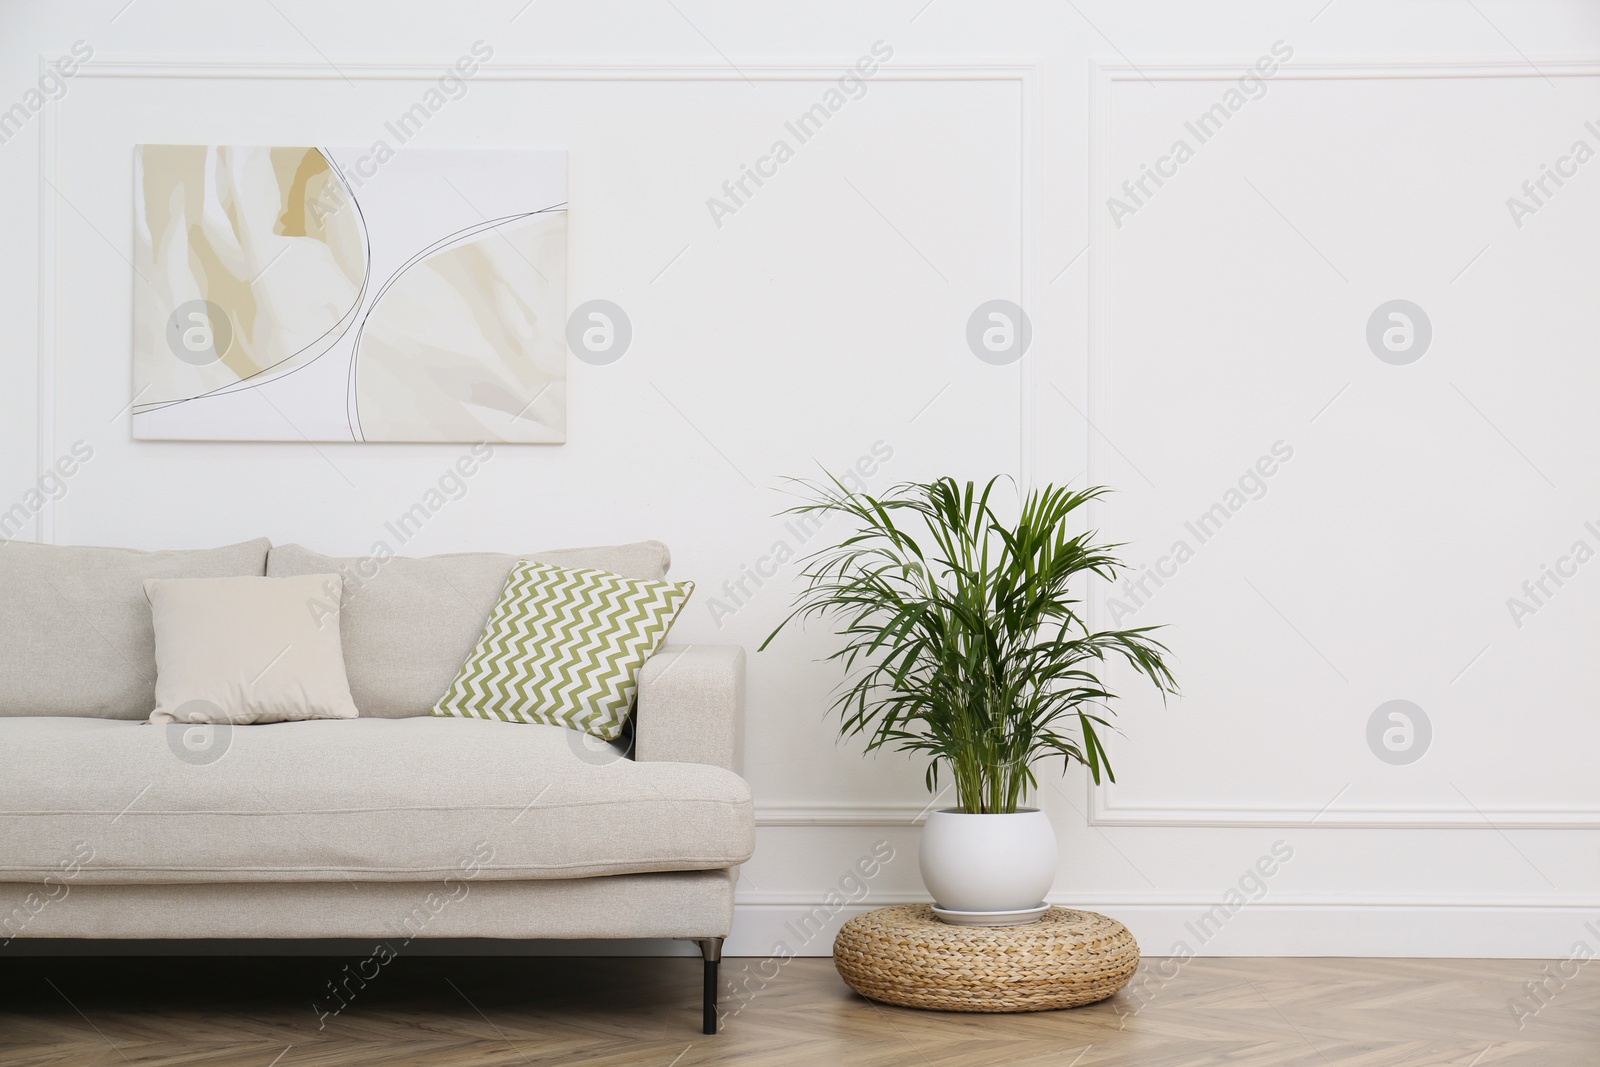 Photo of Comfortable sofa and houseplant near white wall in living room